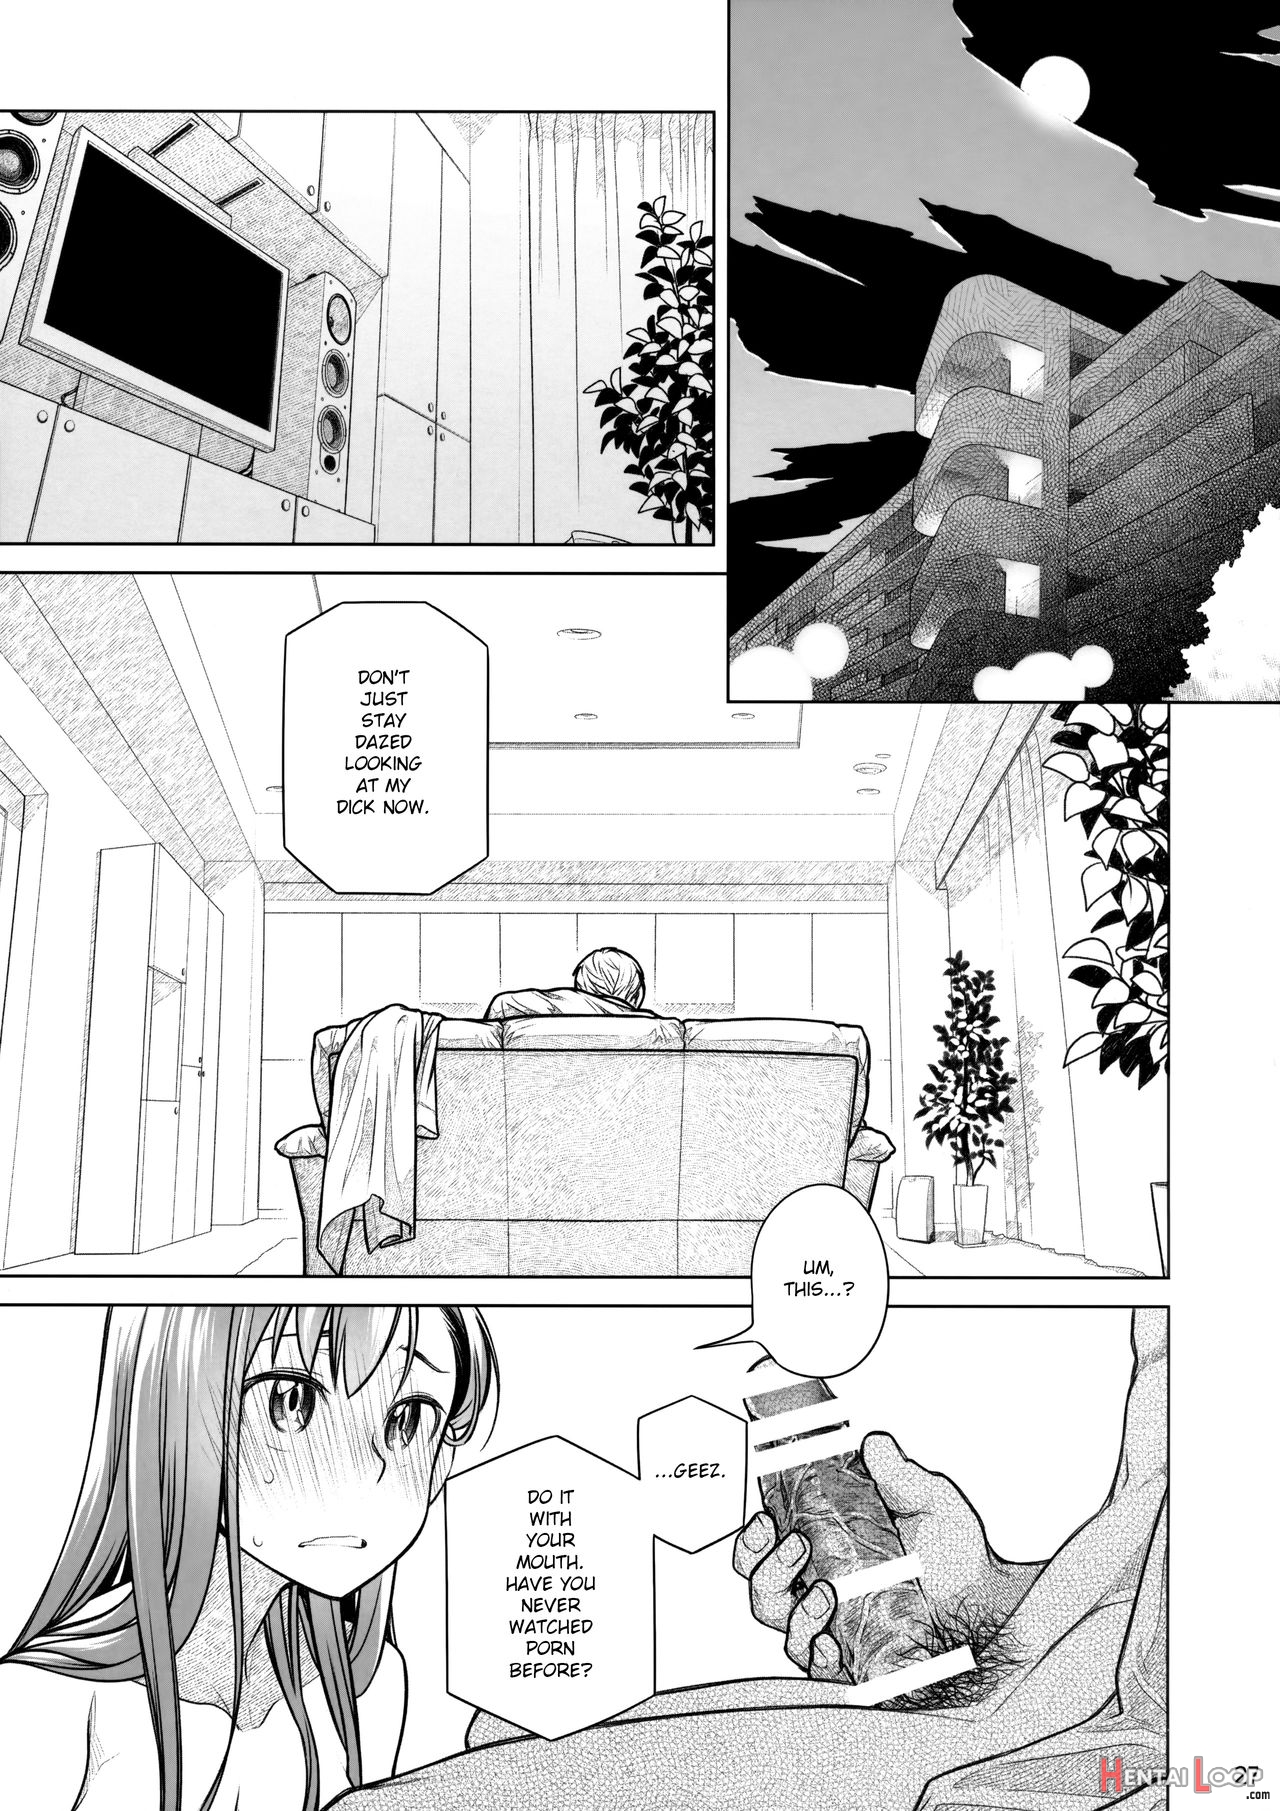 Stay By Me Zenjitsutan Fragile S – Stay By Me “prequel” page 26